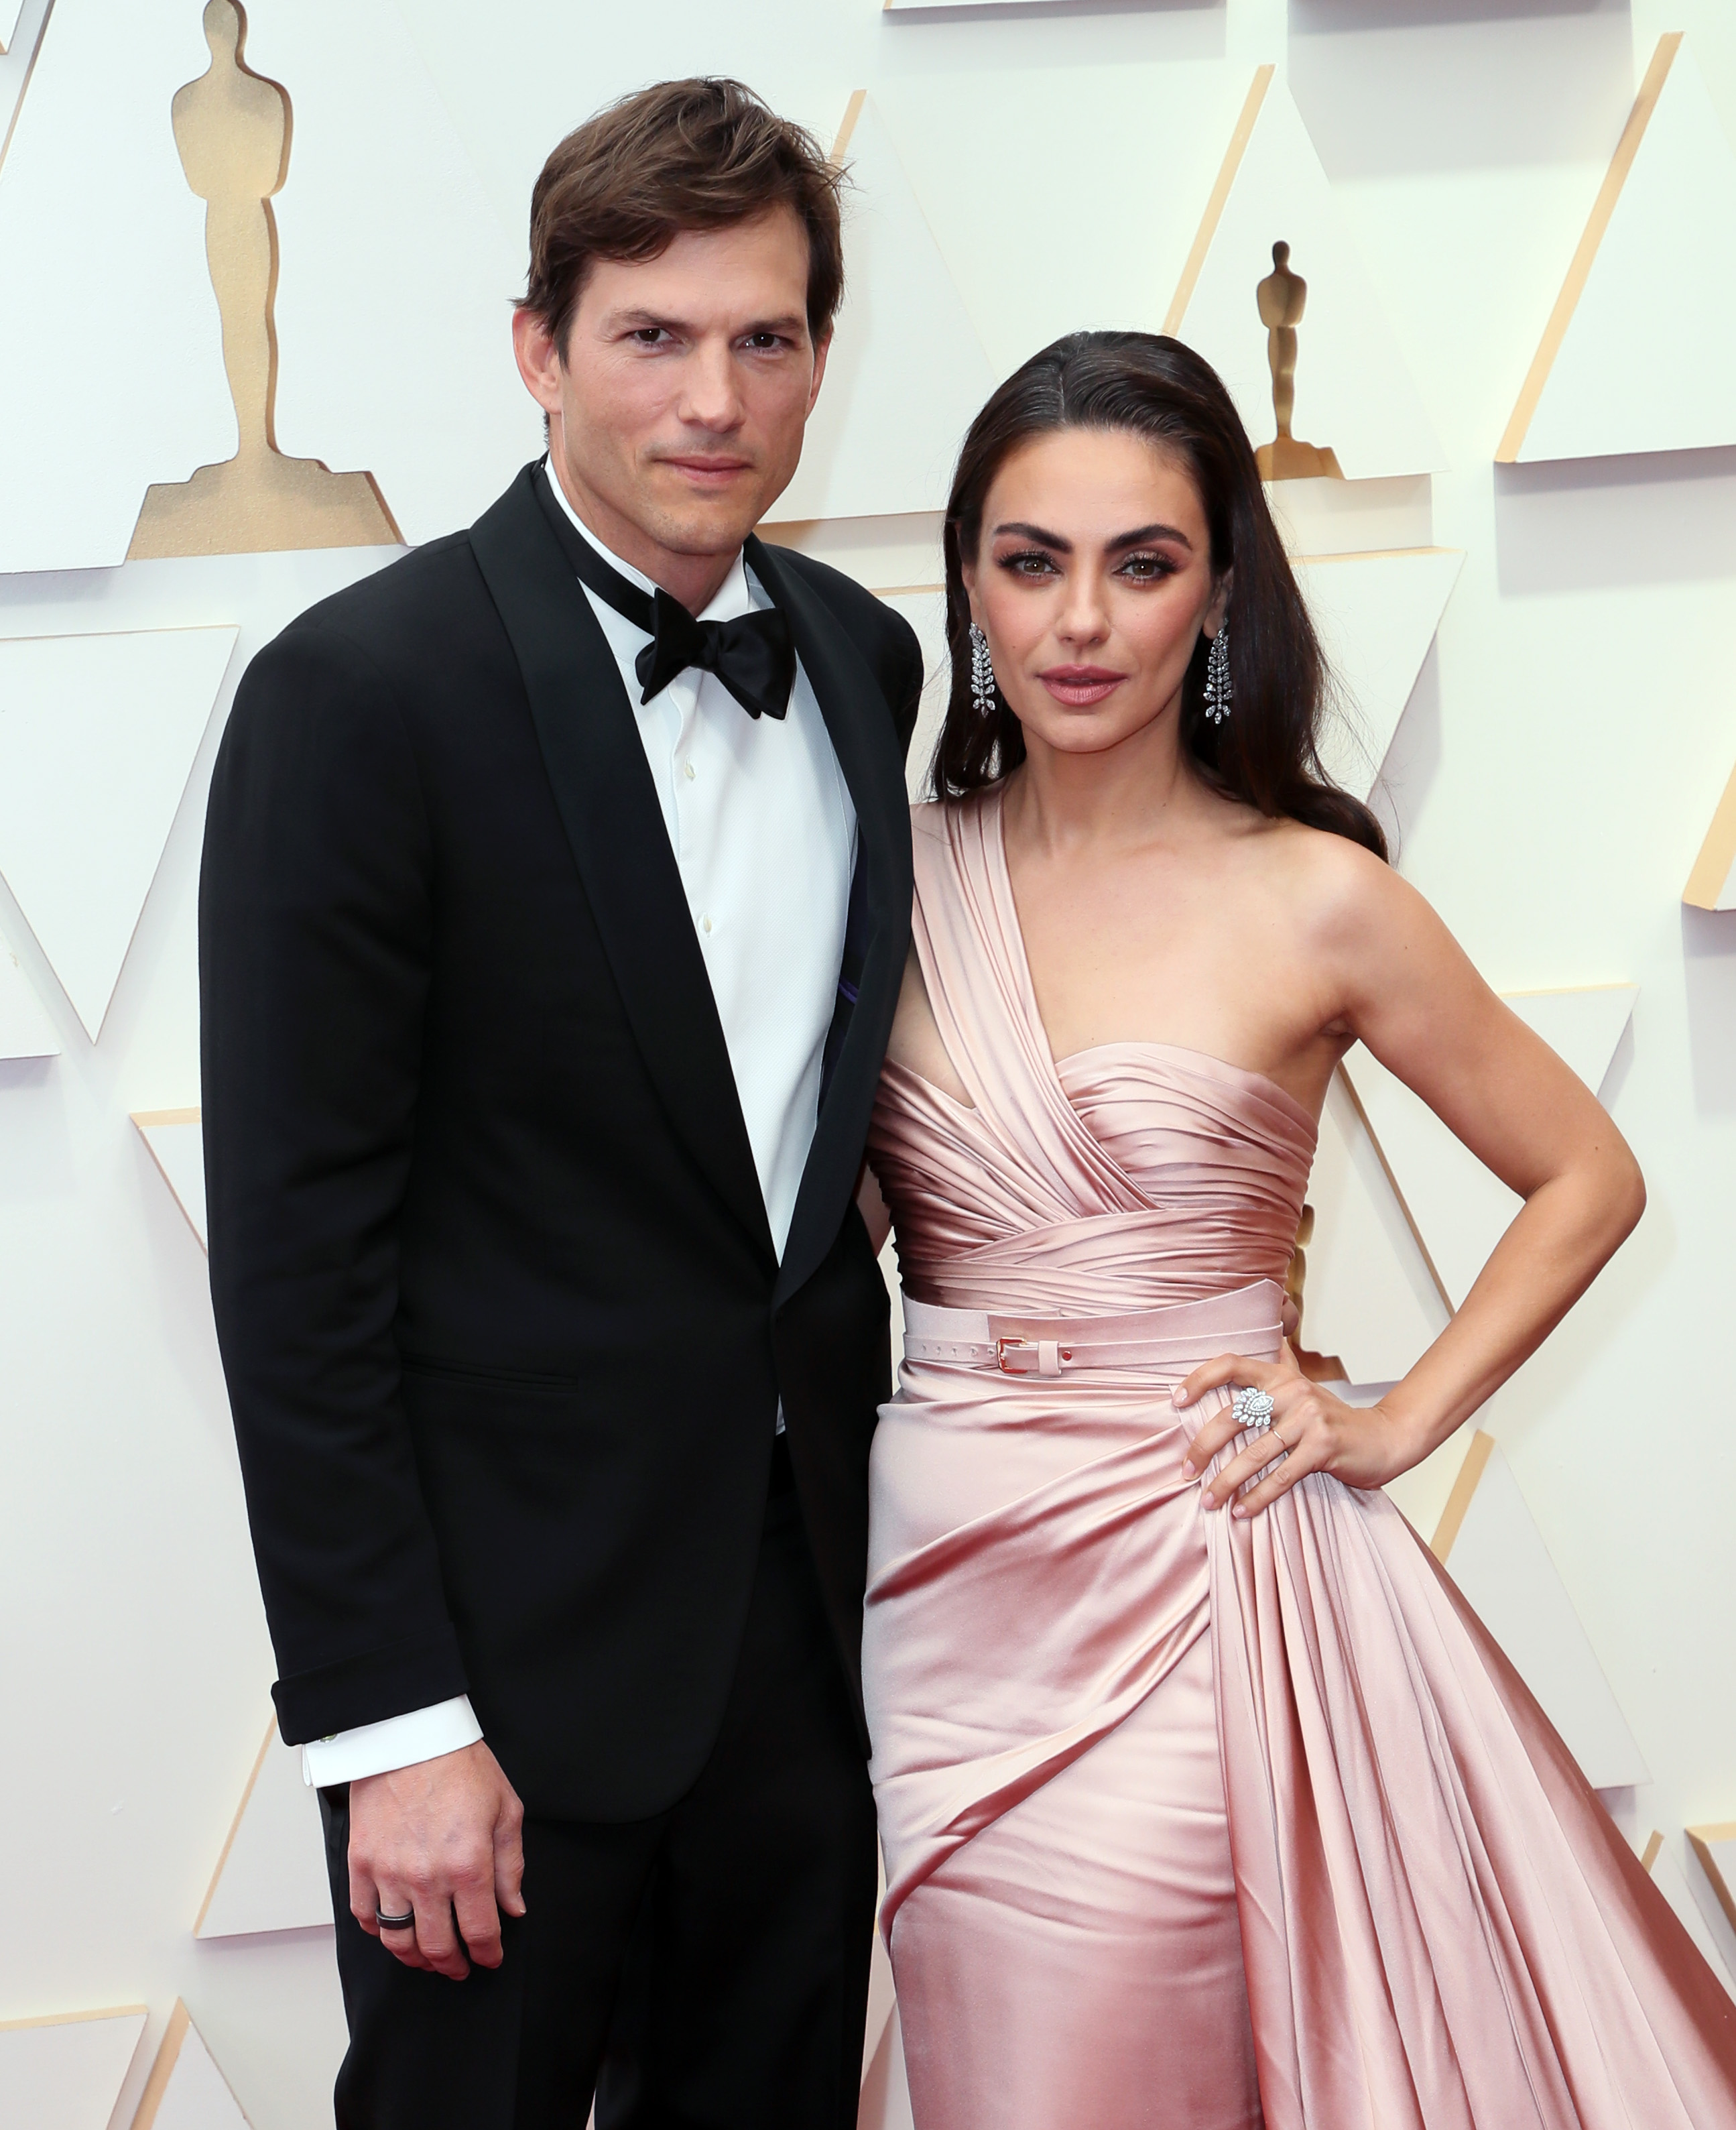 Ashton Kutcher and Mila Kunis attend the 94th Annual Academy Awards at Hollywood and Highland, on March 27, 2022, in Hollywood, California. | Source: Getty Images